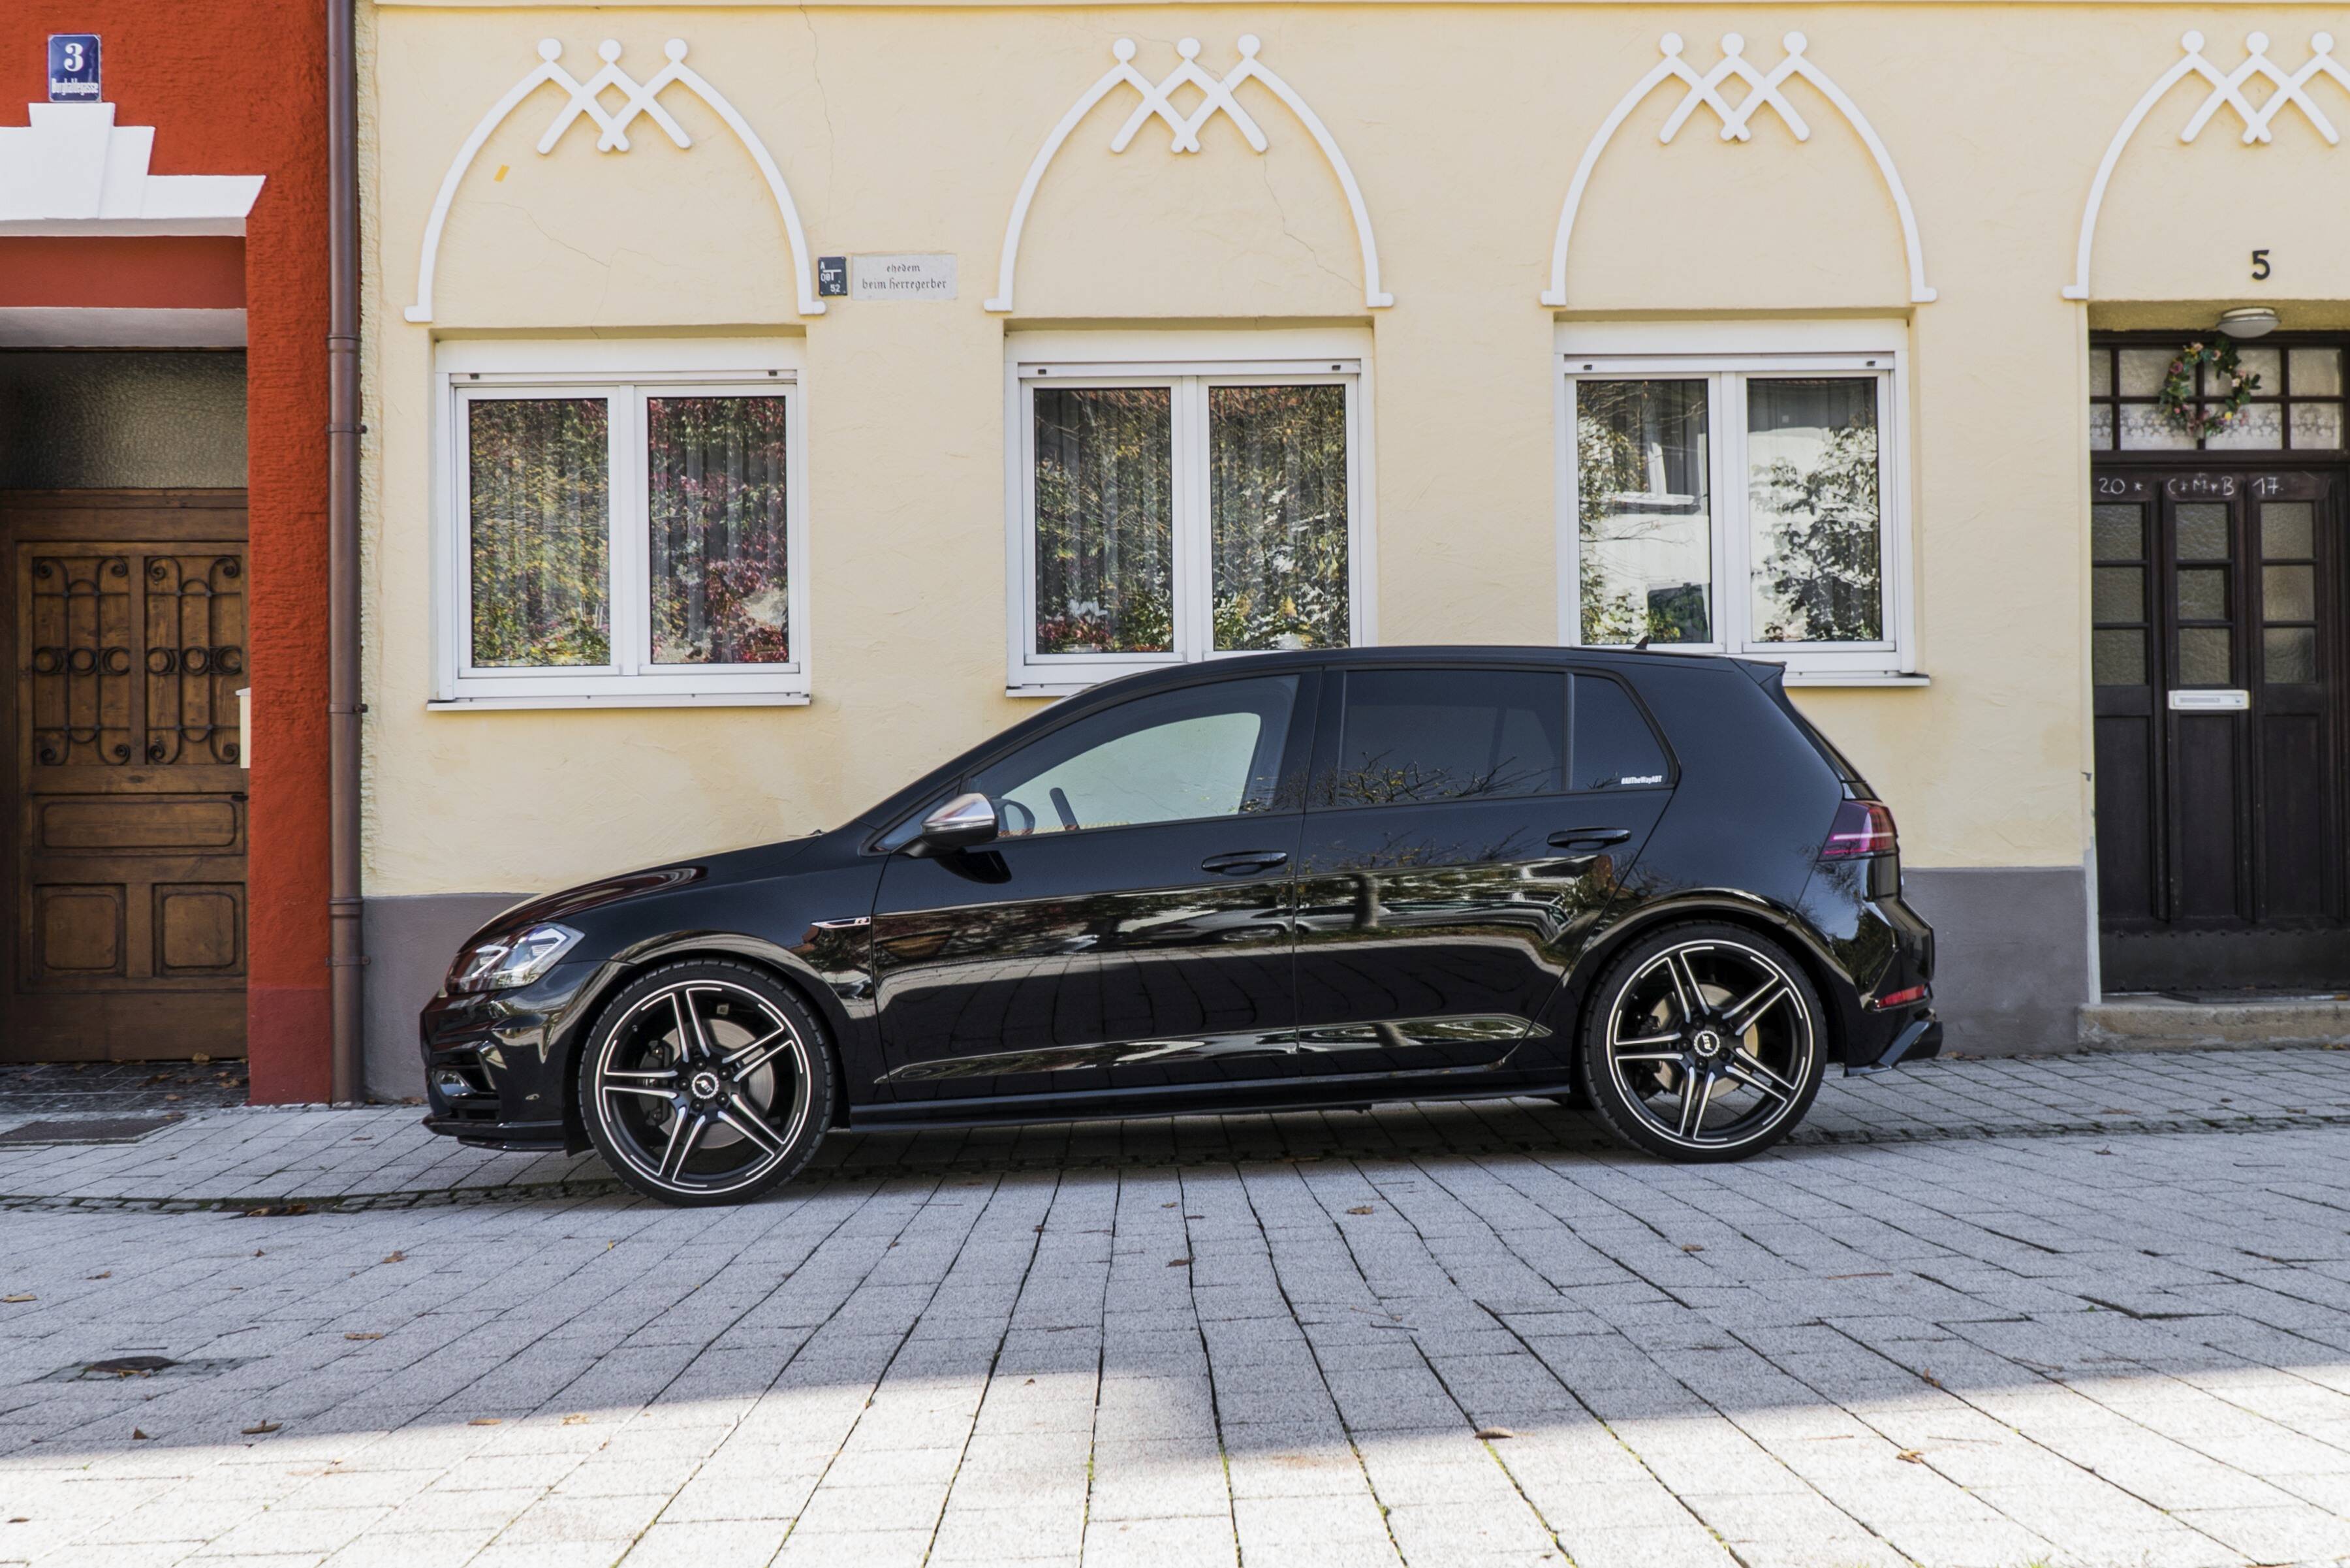 Golf equipment for the high-speed society – 400 HP in the ABT Golf VII R -  Audi Tuning, VW Tuning, Chiptuning von ABT Sportsline.